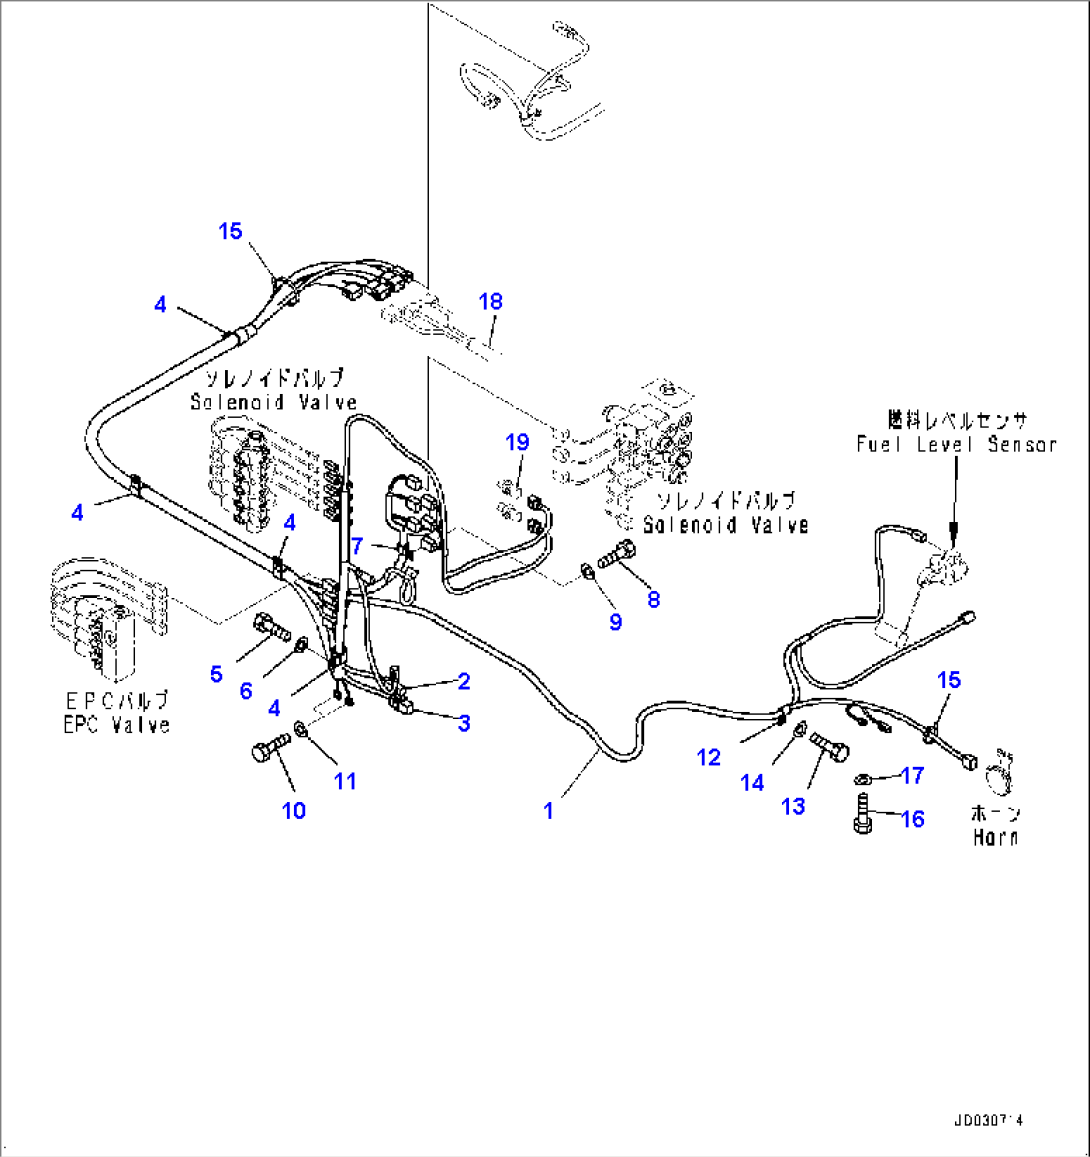 Electric Wiring Harness, Valve Wiring Harness (#2616-)